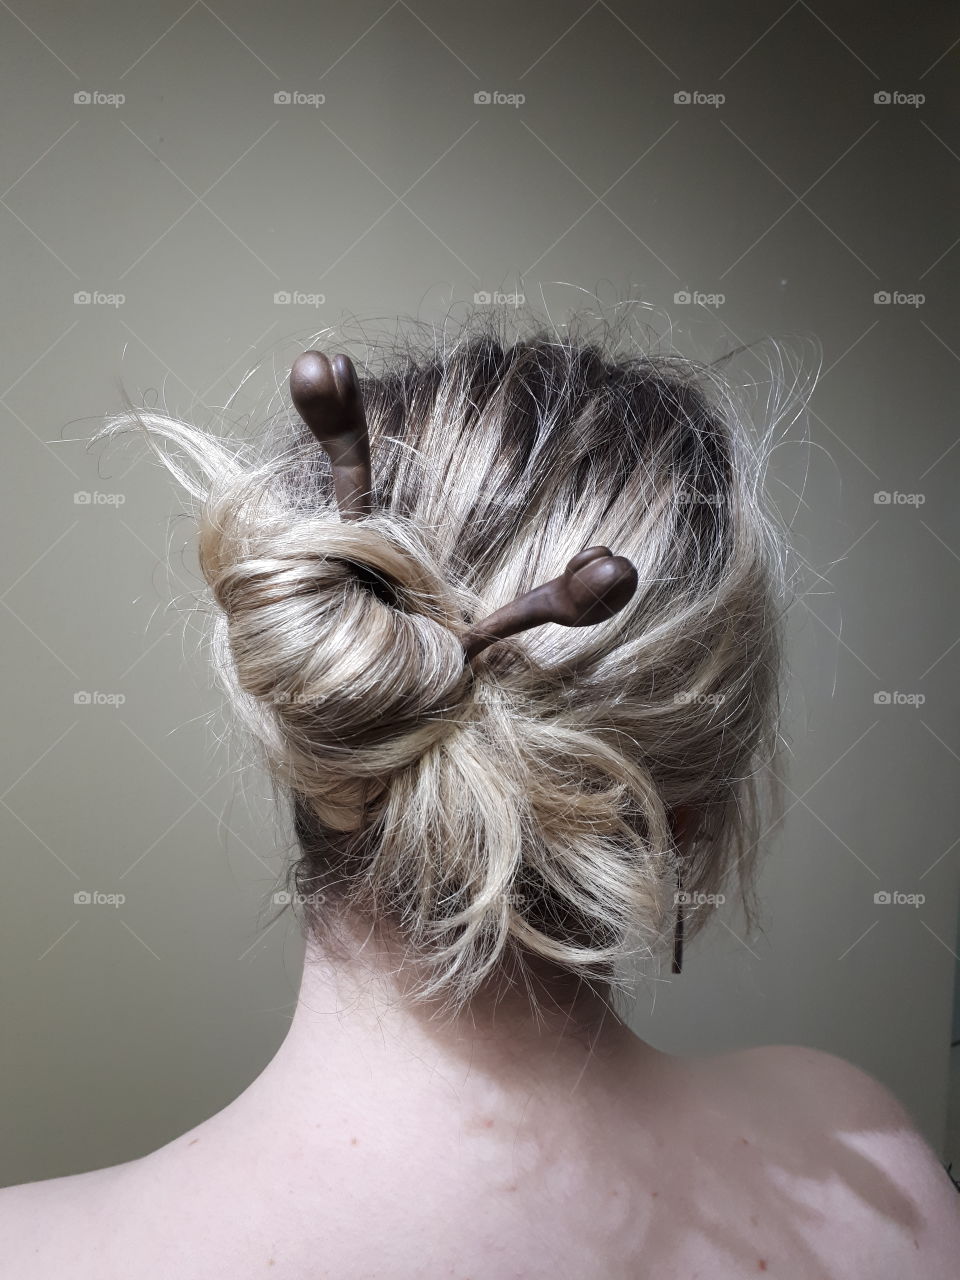 bond hairstyles and accessories